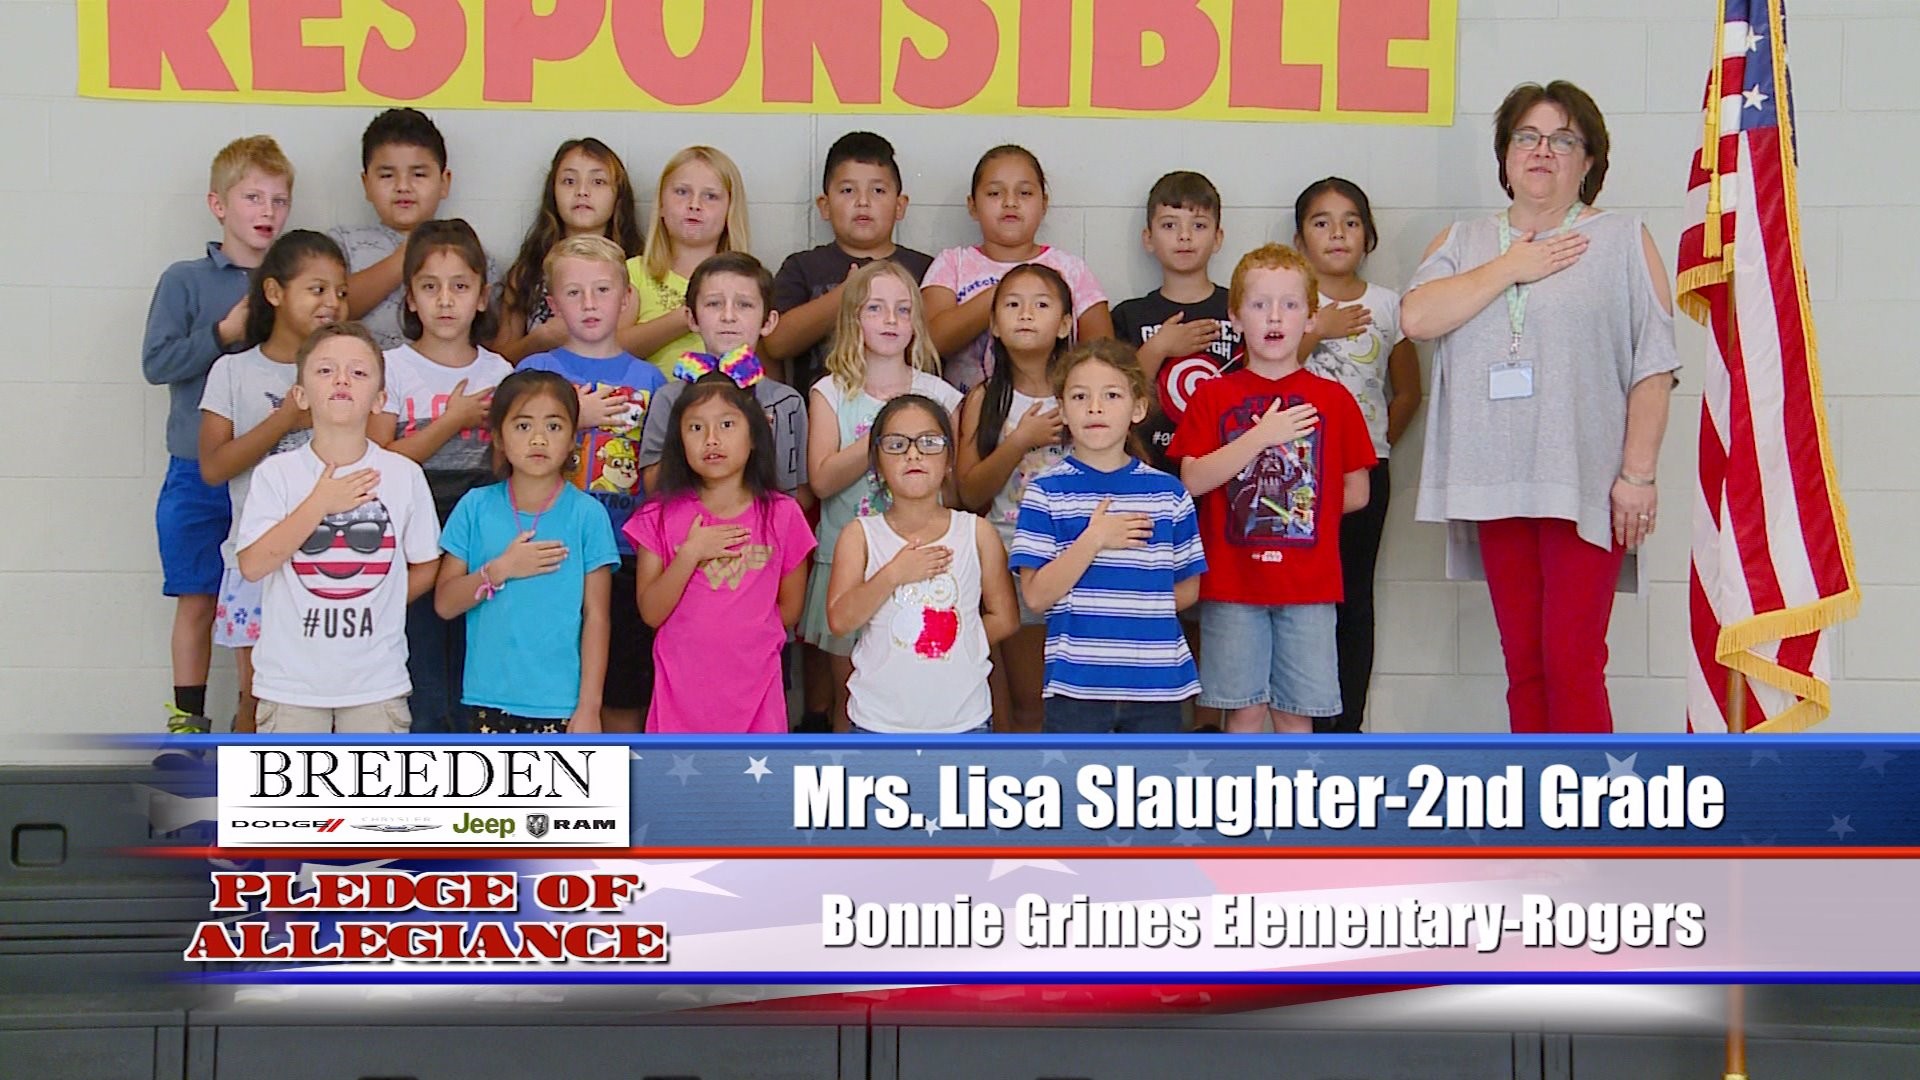 Mrs. Lisa Slaughter  2nd Grade Bonnie Grimes Elementary, Rogers